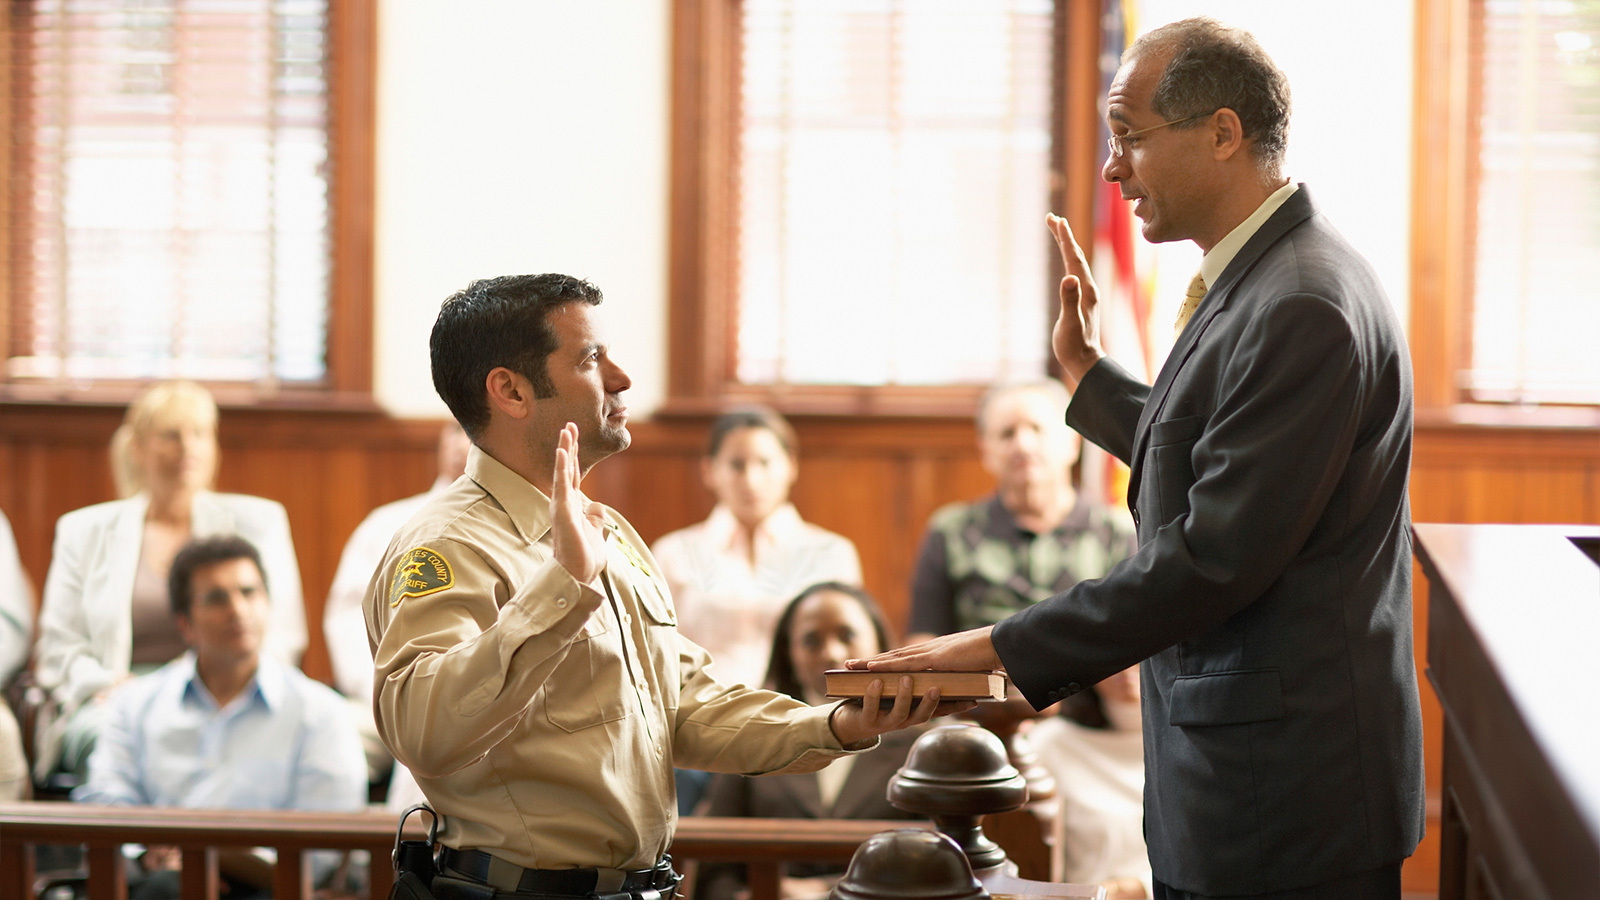 swearing in a witness in courtroom